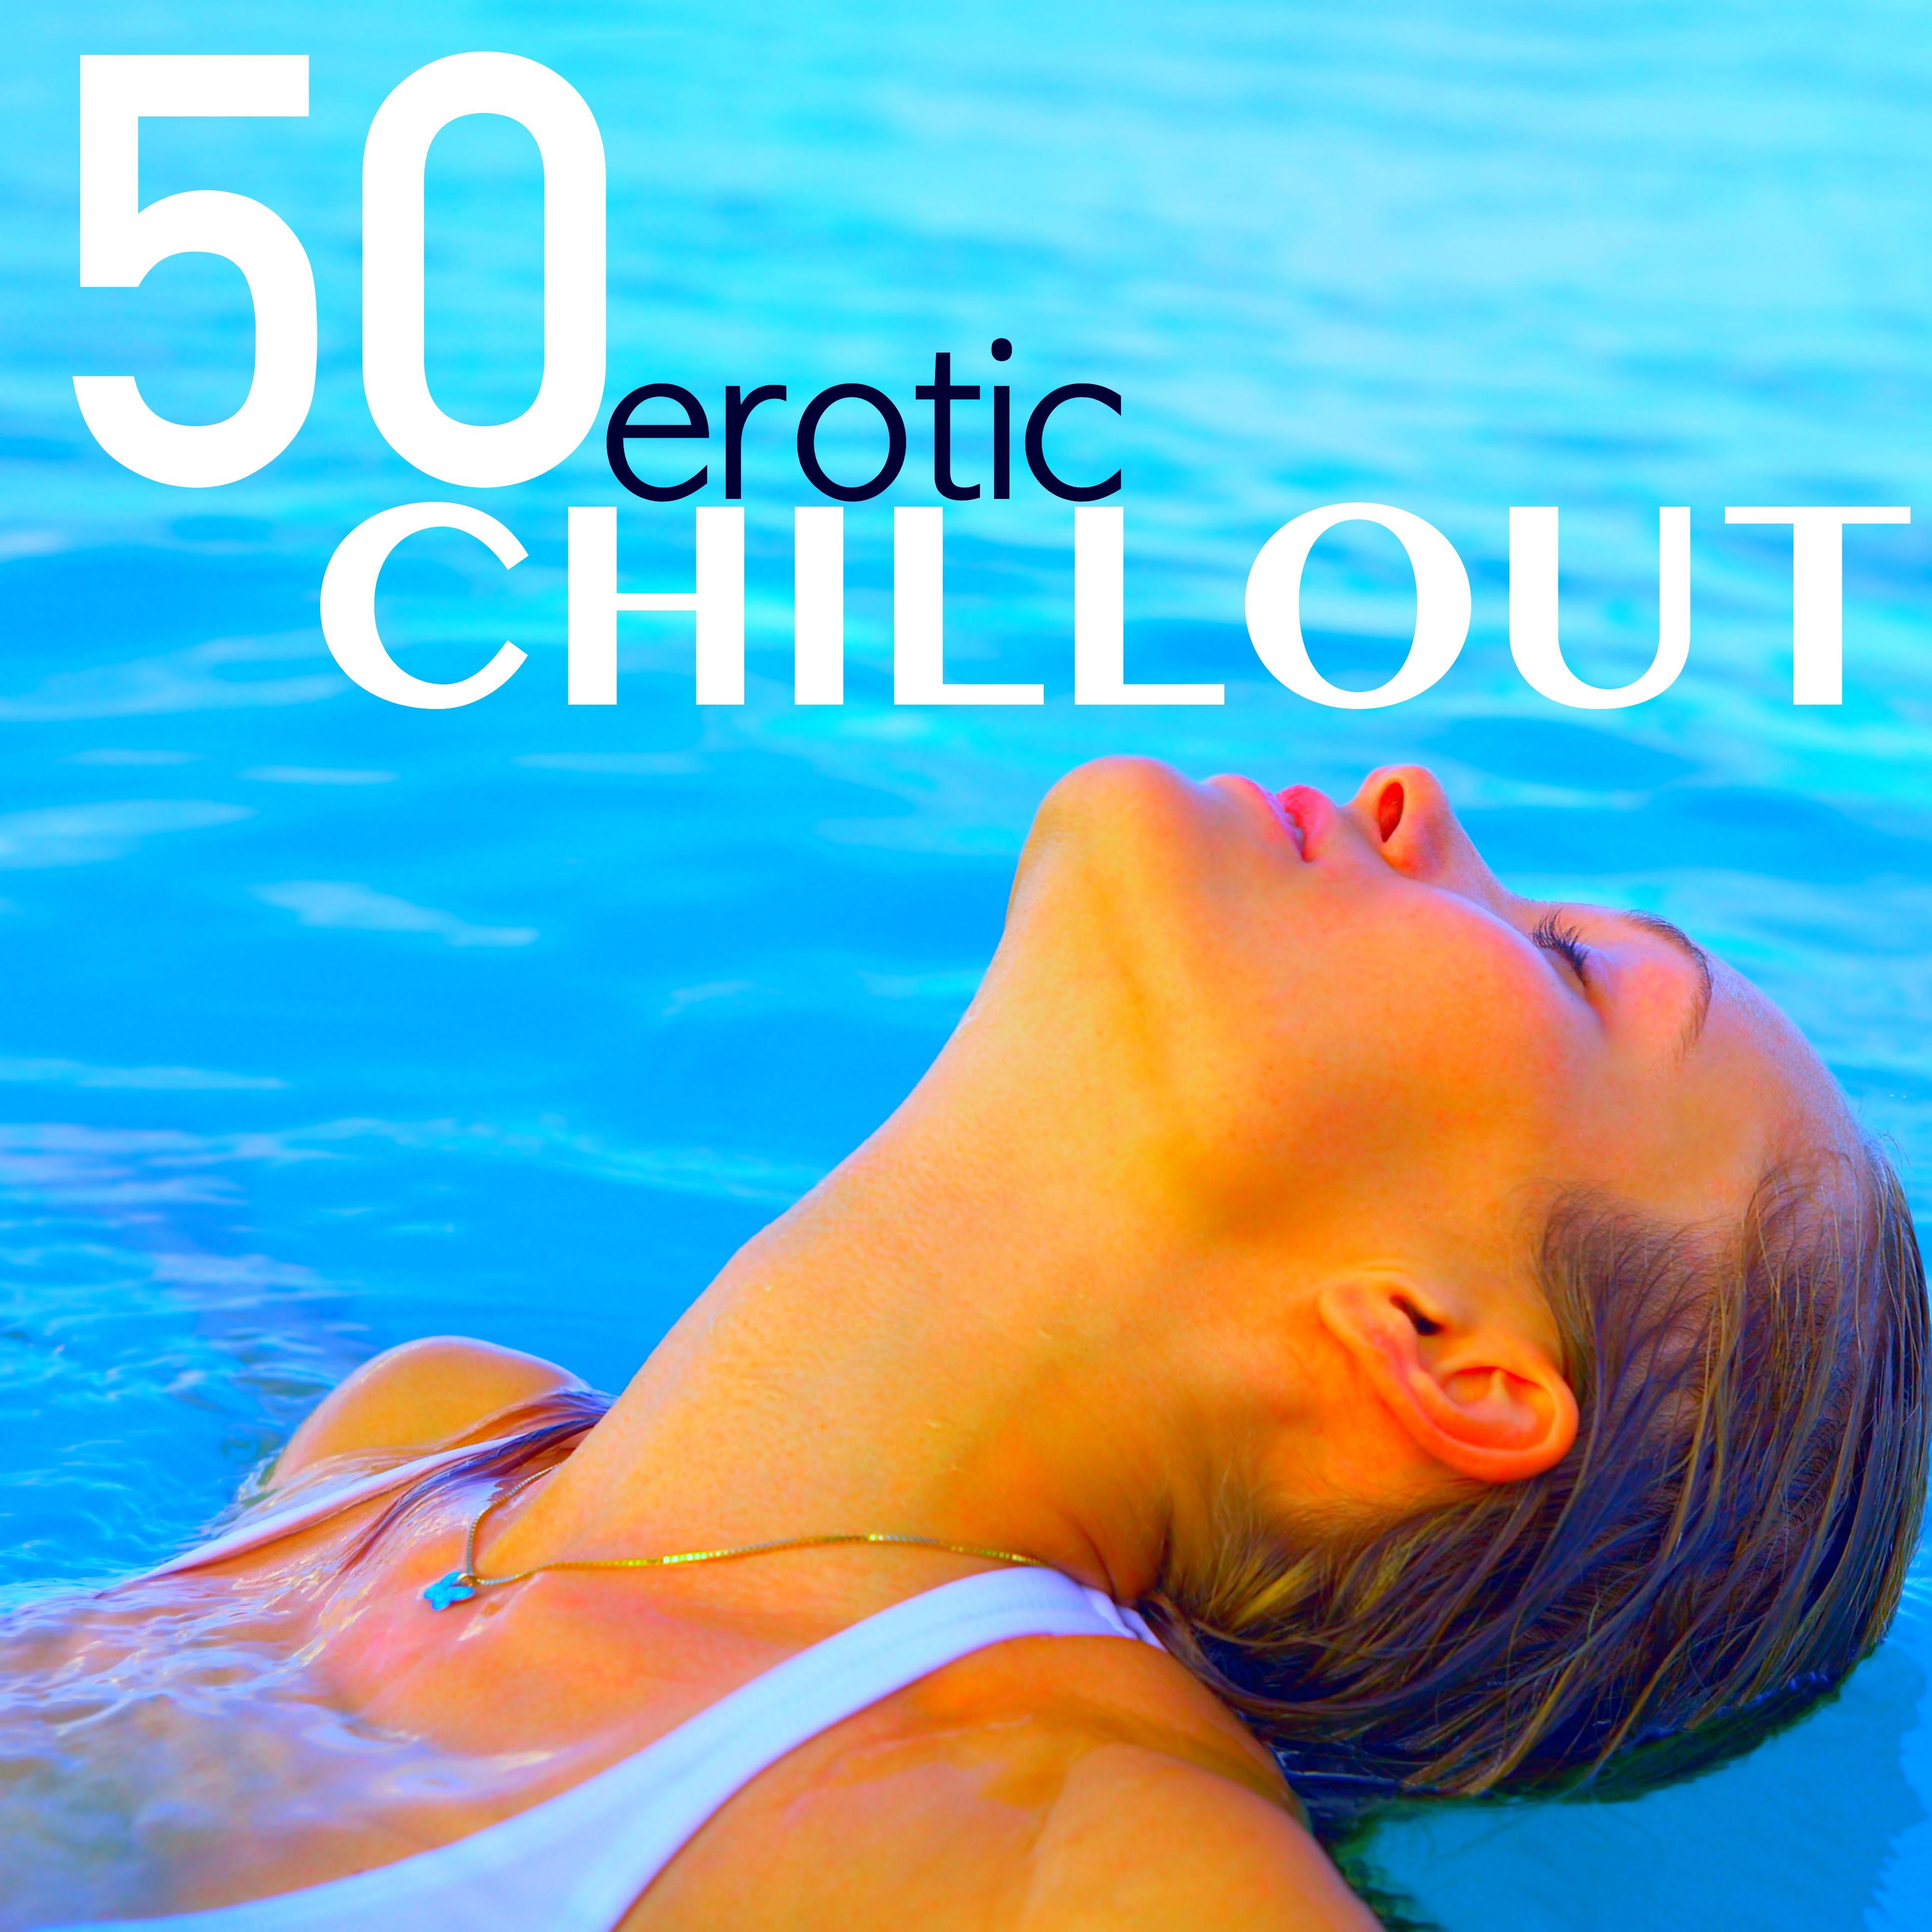 50 Erotic Chillout - Music for Chillax, Erotic Massage, Sensuality and Shades of Love